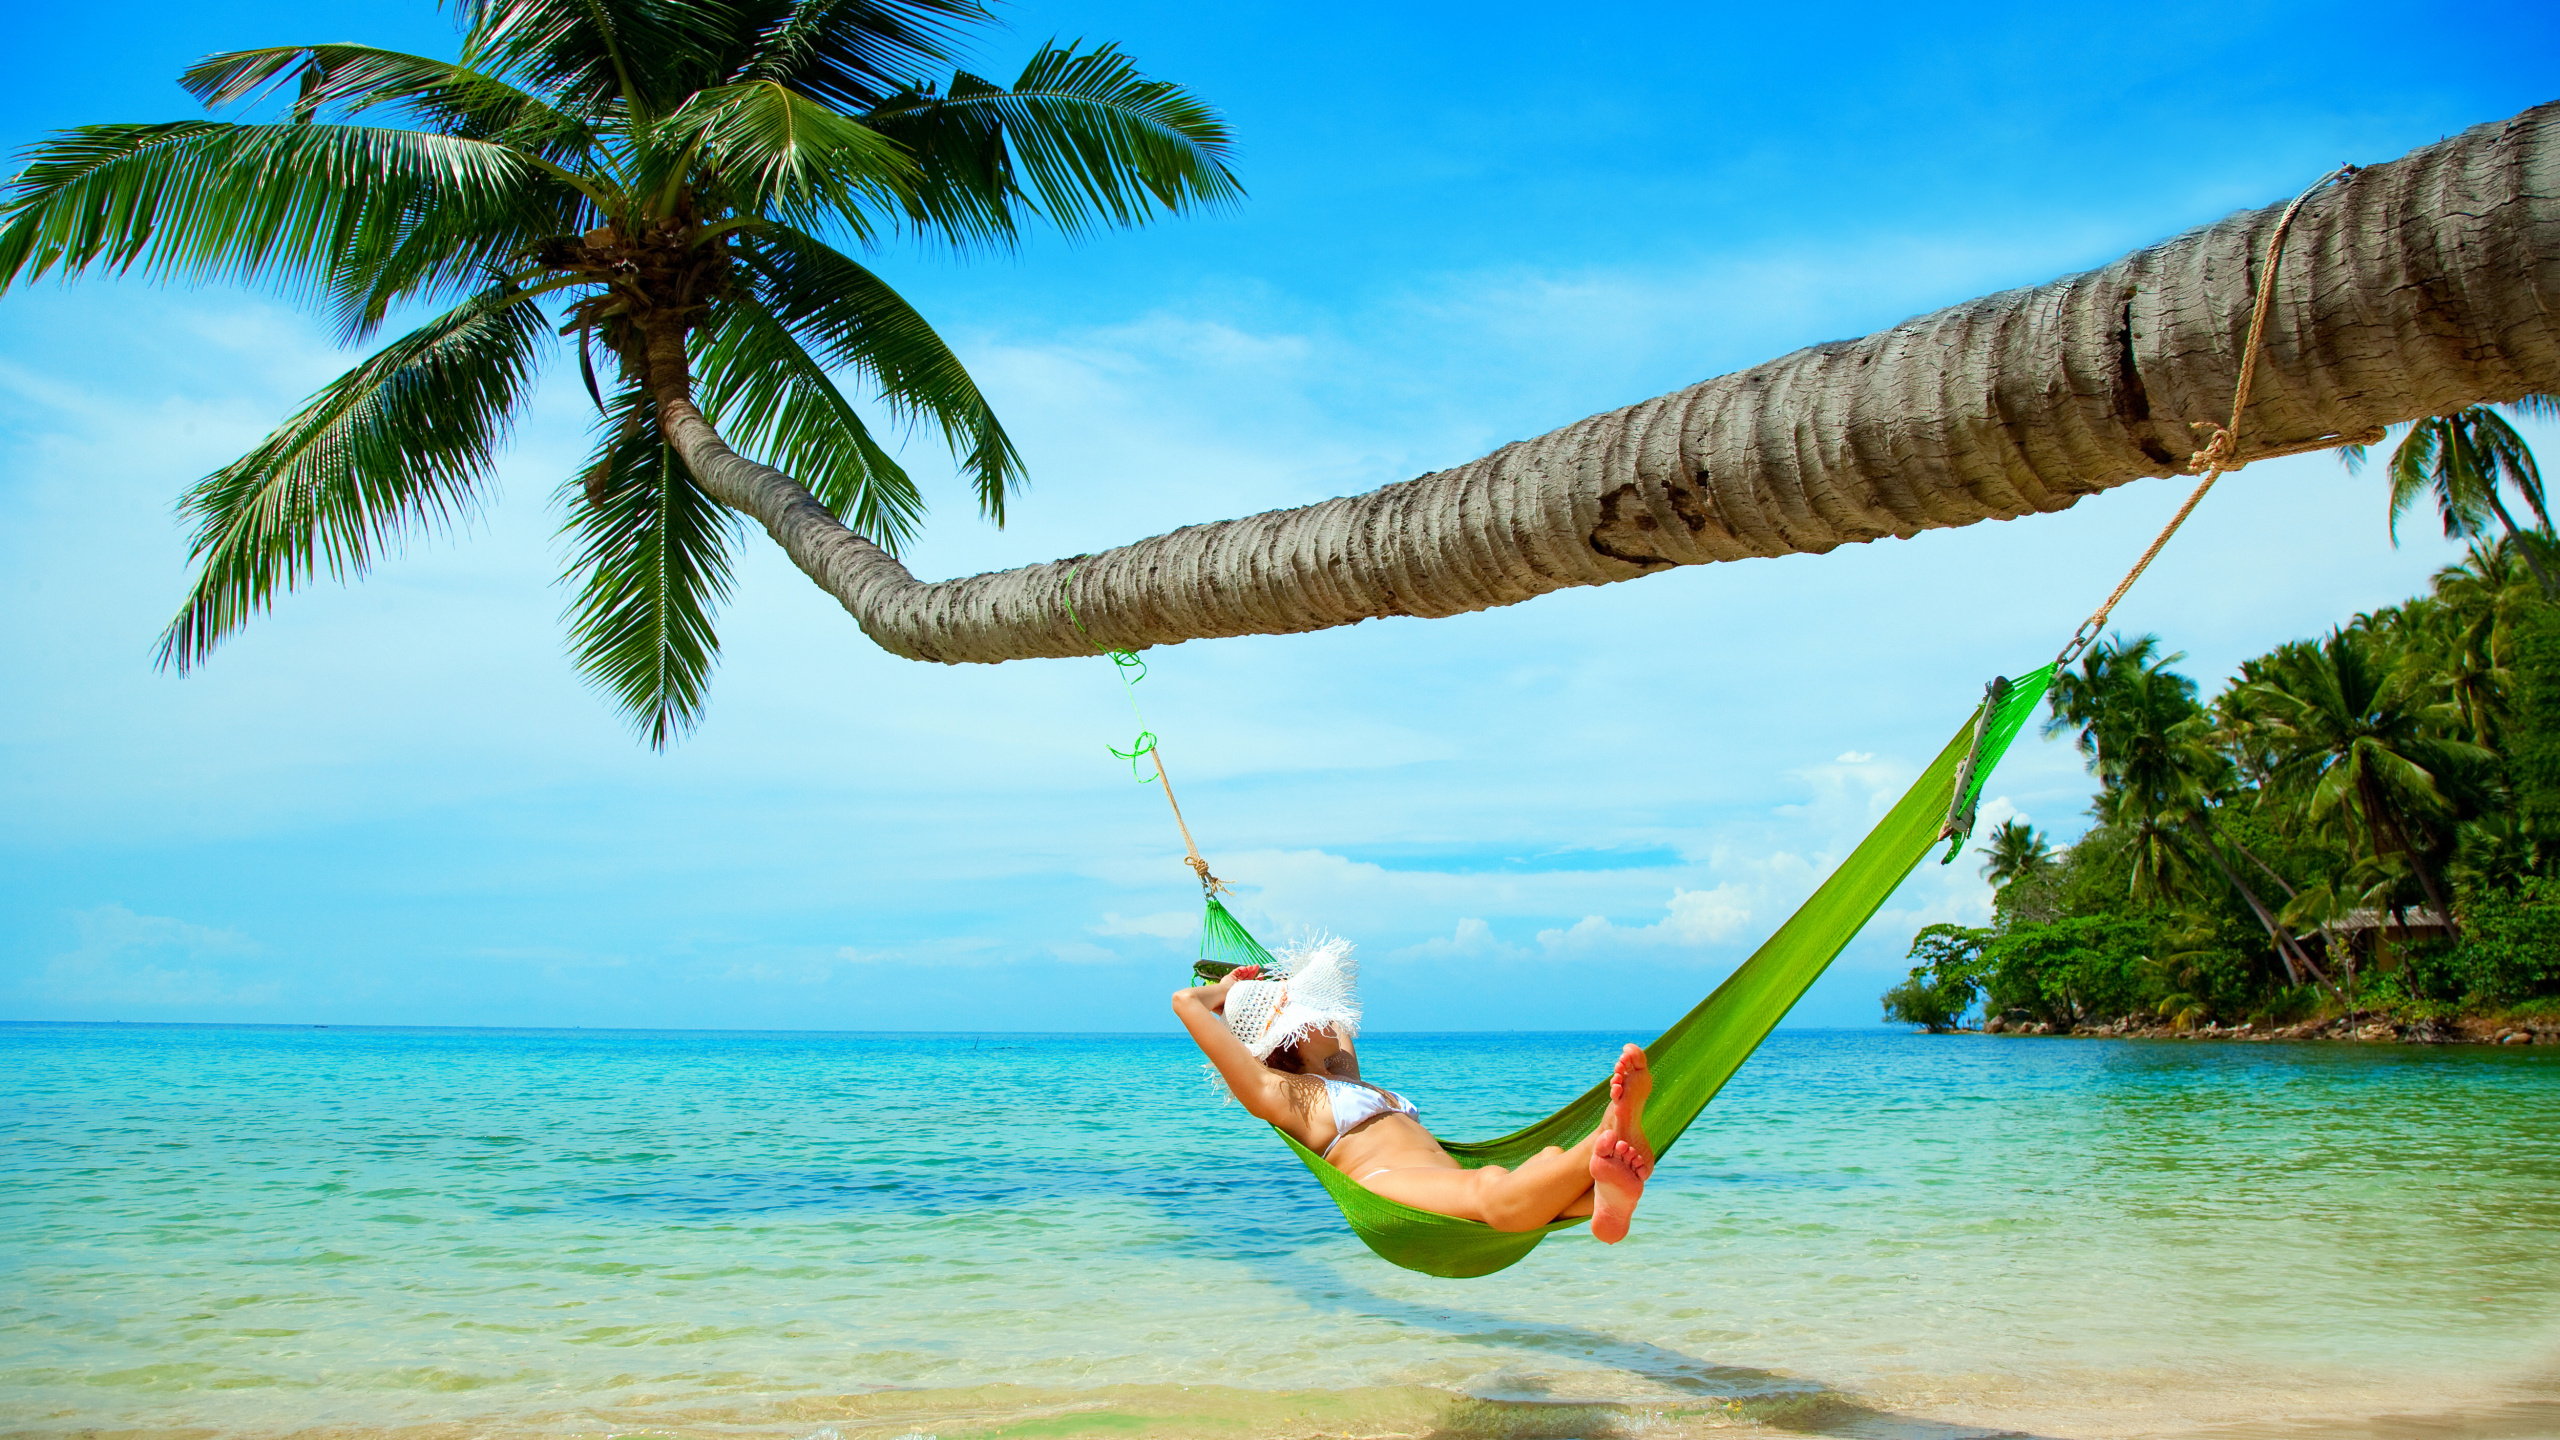 Woman in White Shirt and Green Shorts Lying on Hammock Under Coconut Tree During Daytime. Wallpaper in 2560x1440 Resolution